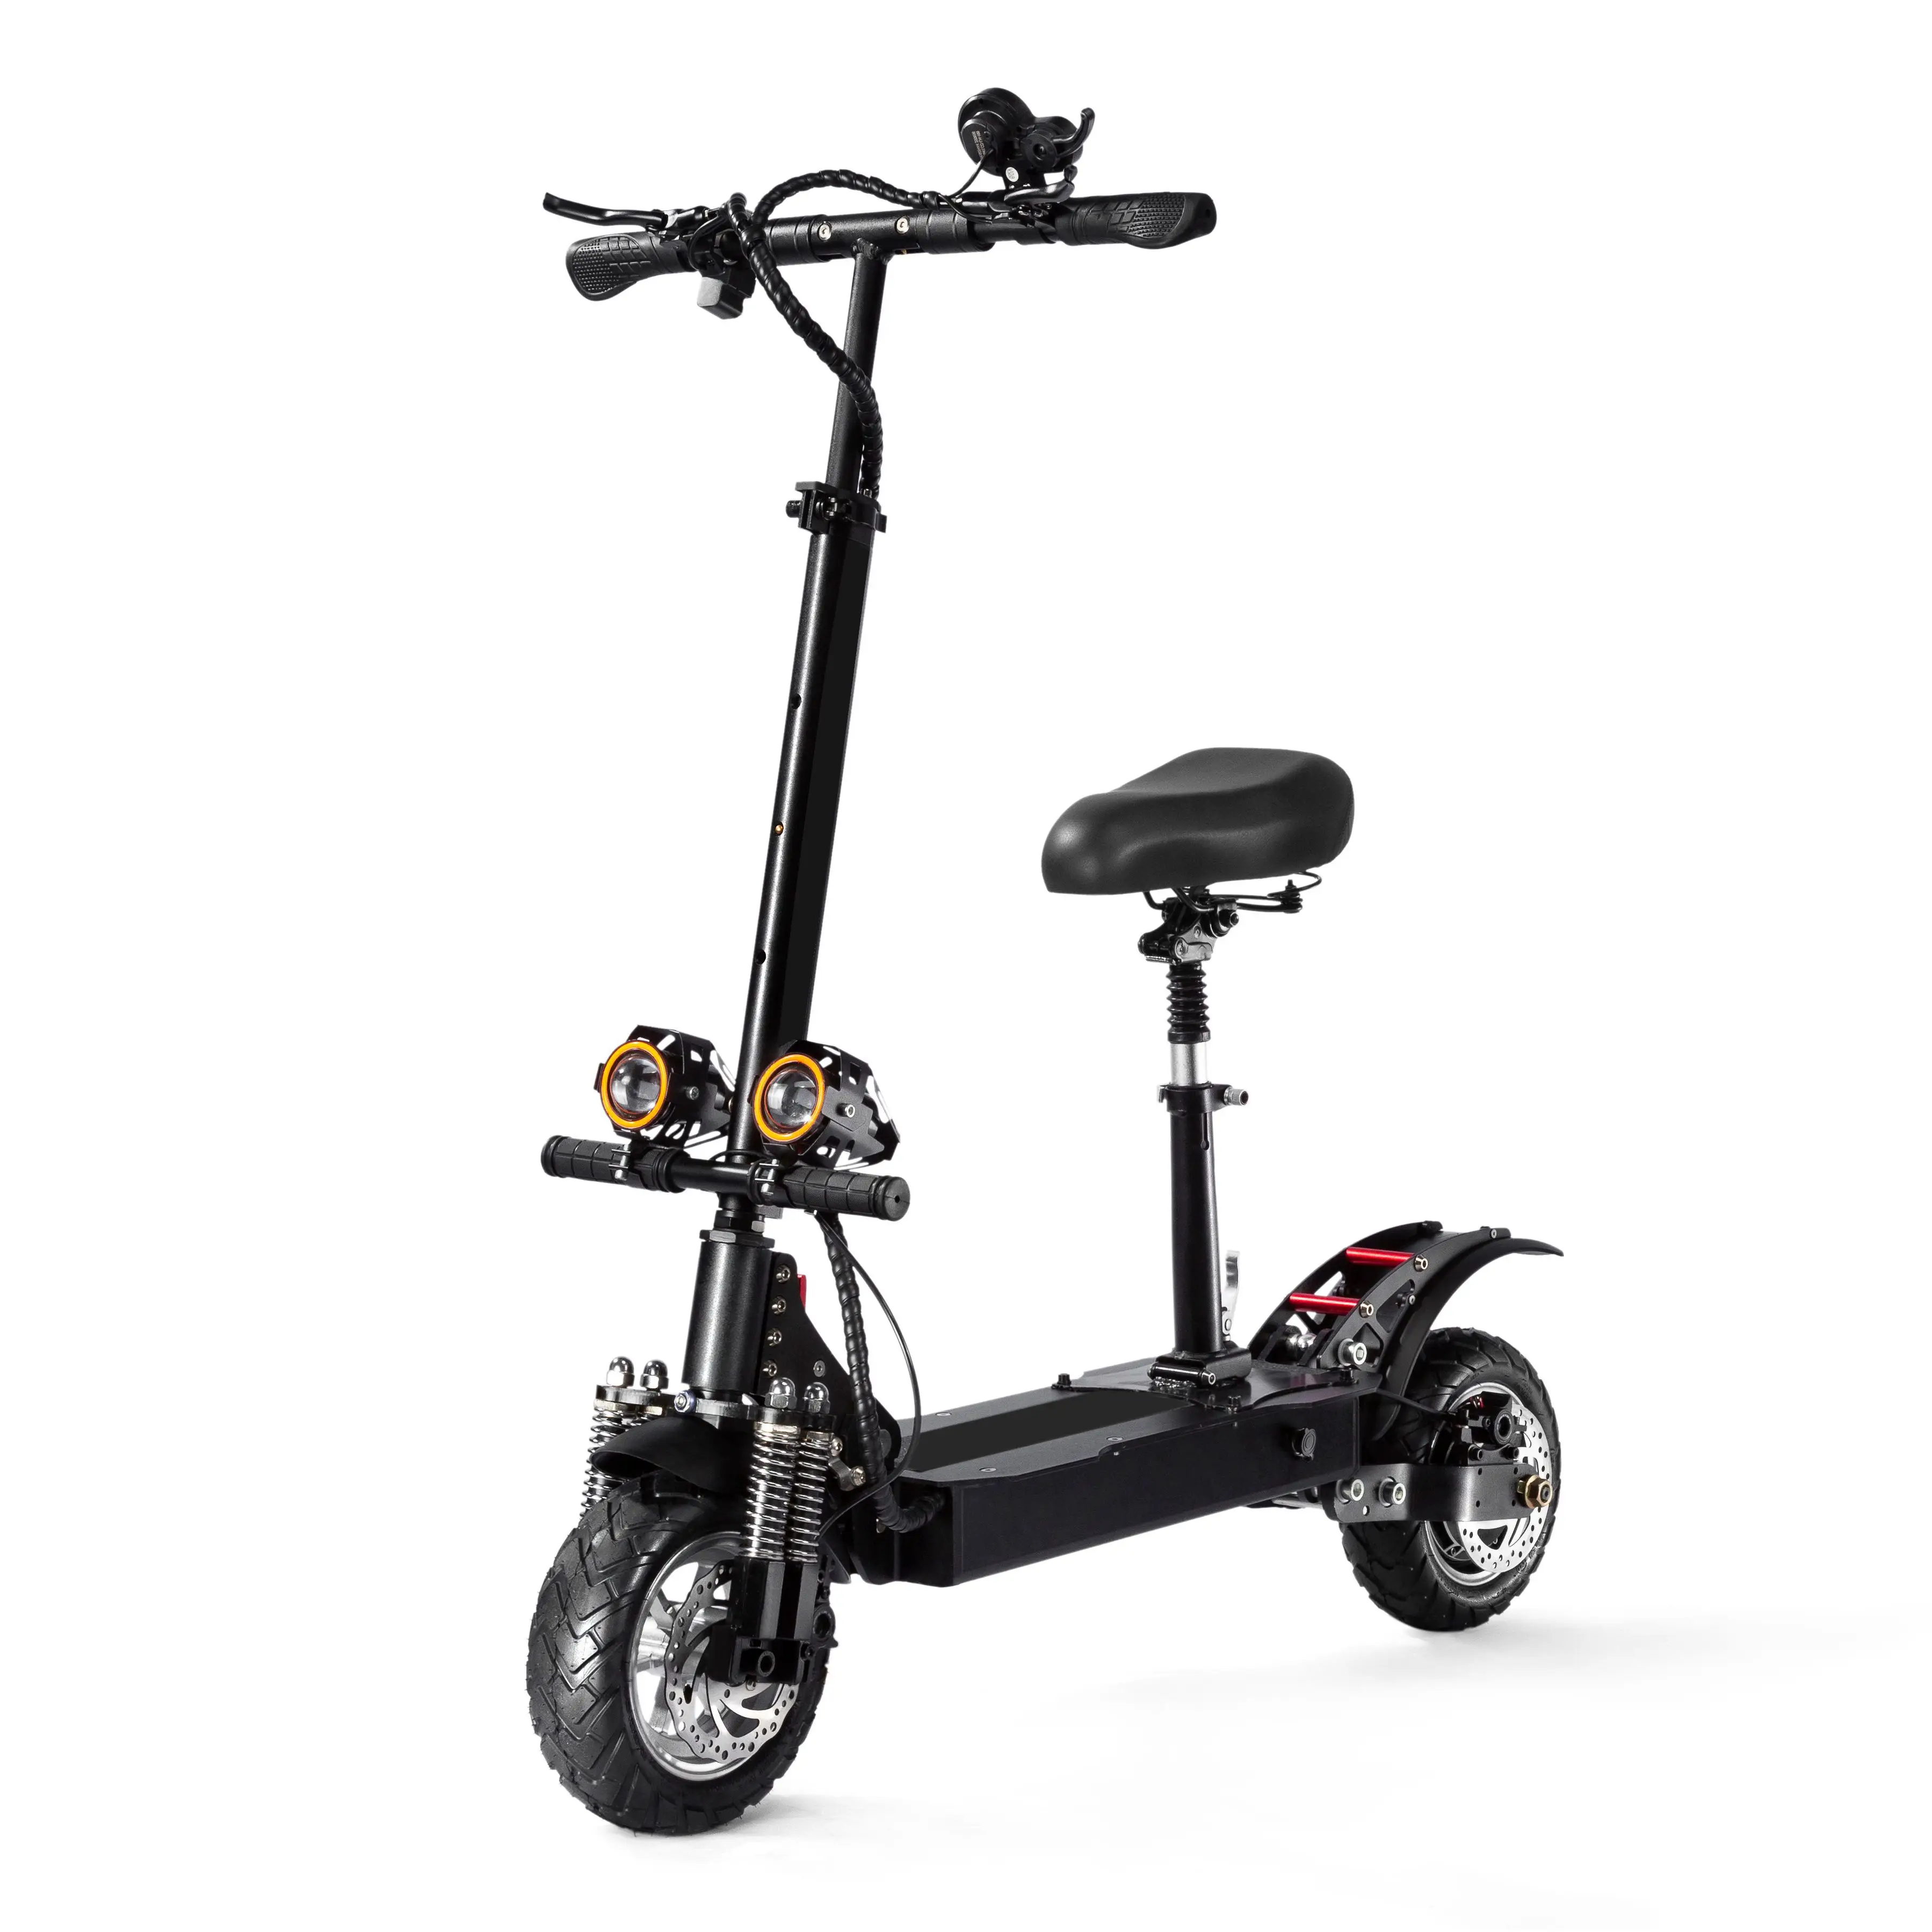 

Freezway new model powerful adult 1600w 3200w 52v off road electric scooter R4